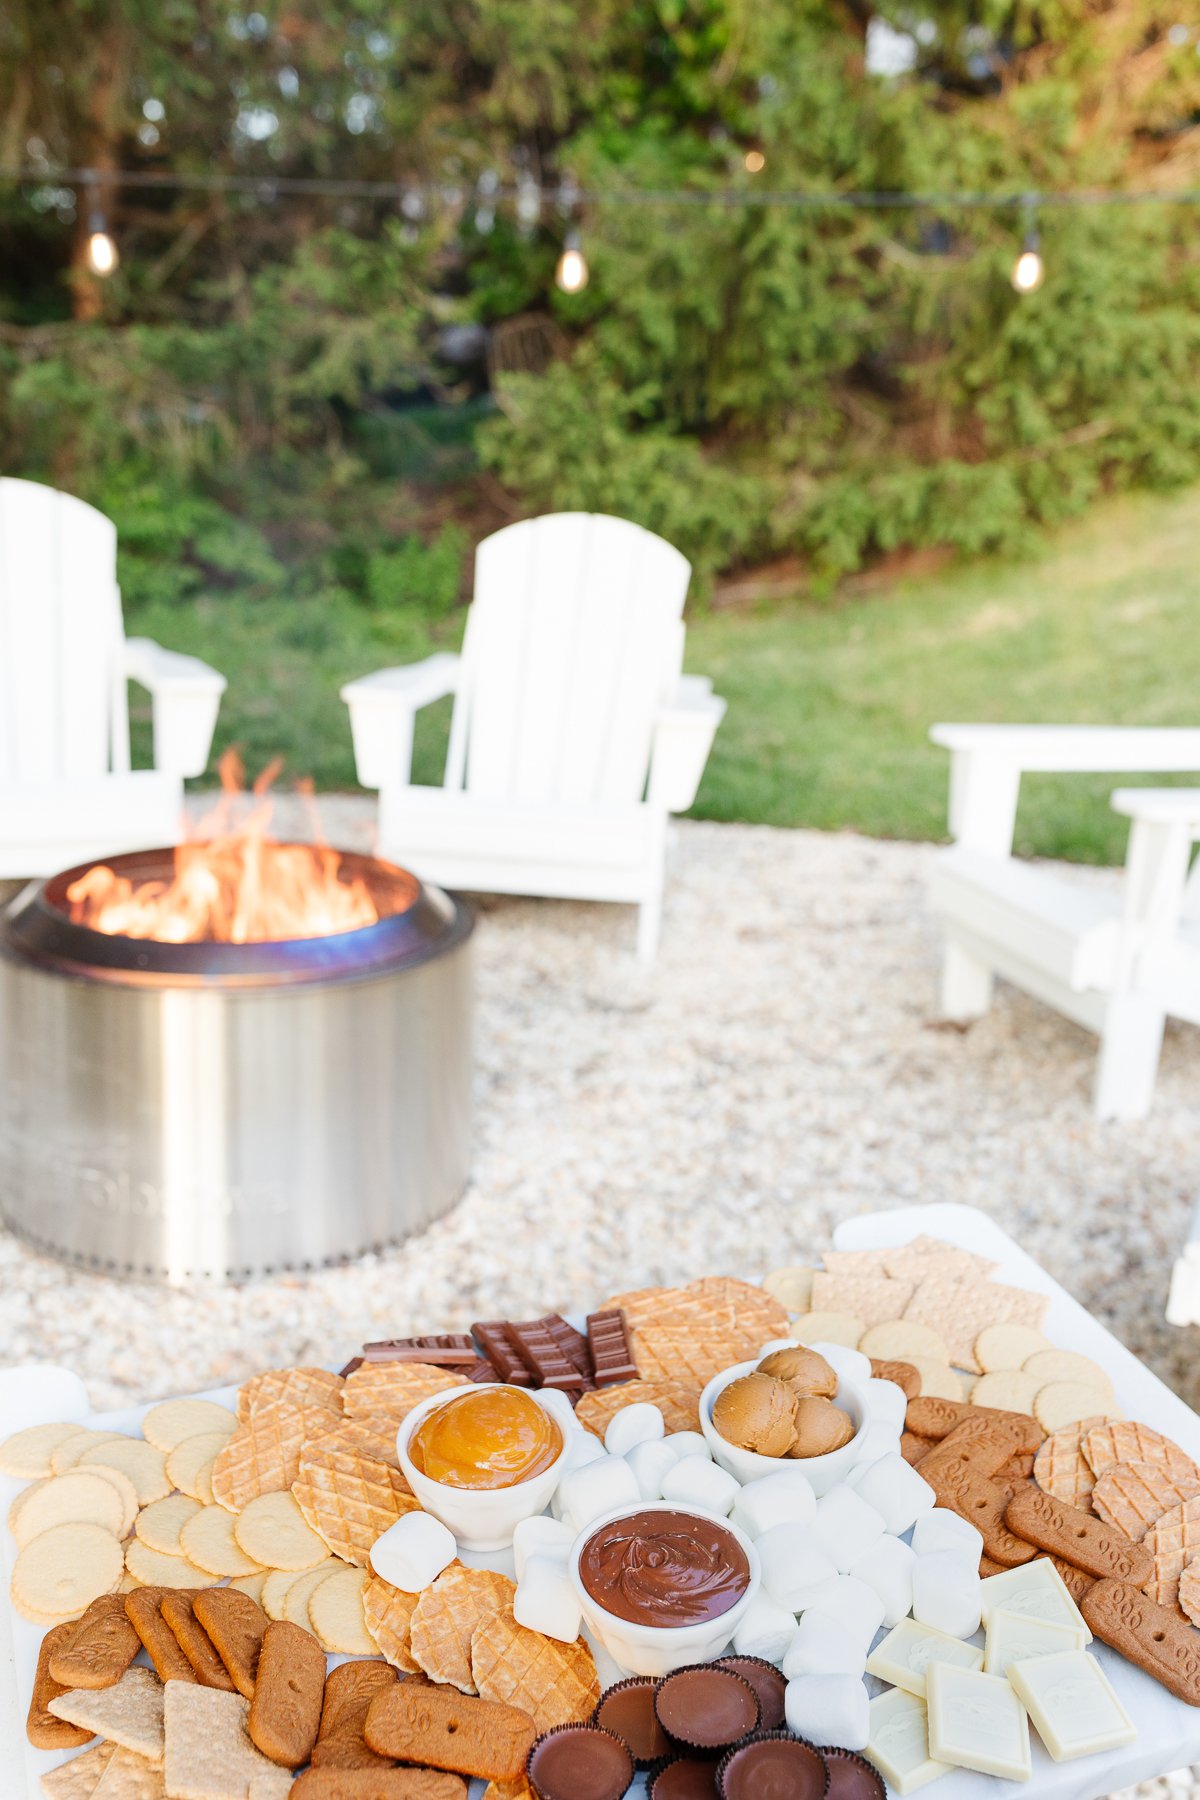 A Solo stove campfire on a gravel fire pit, surrounded by white chairs. A smores charcuterie board rests on one chair.